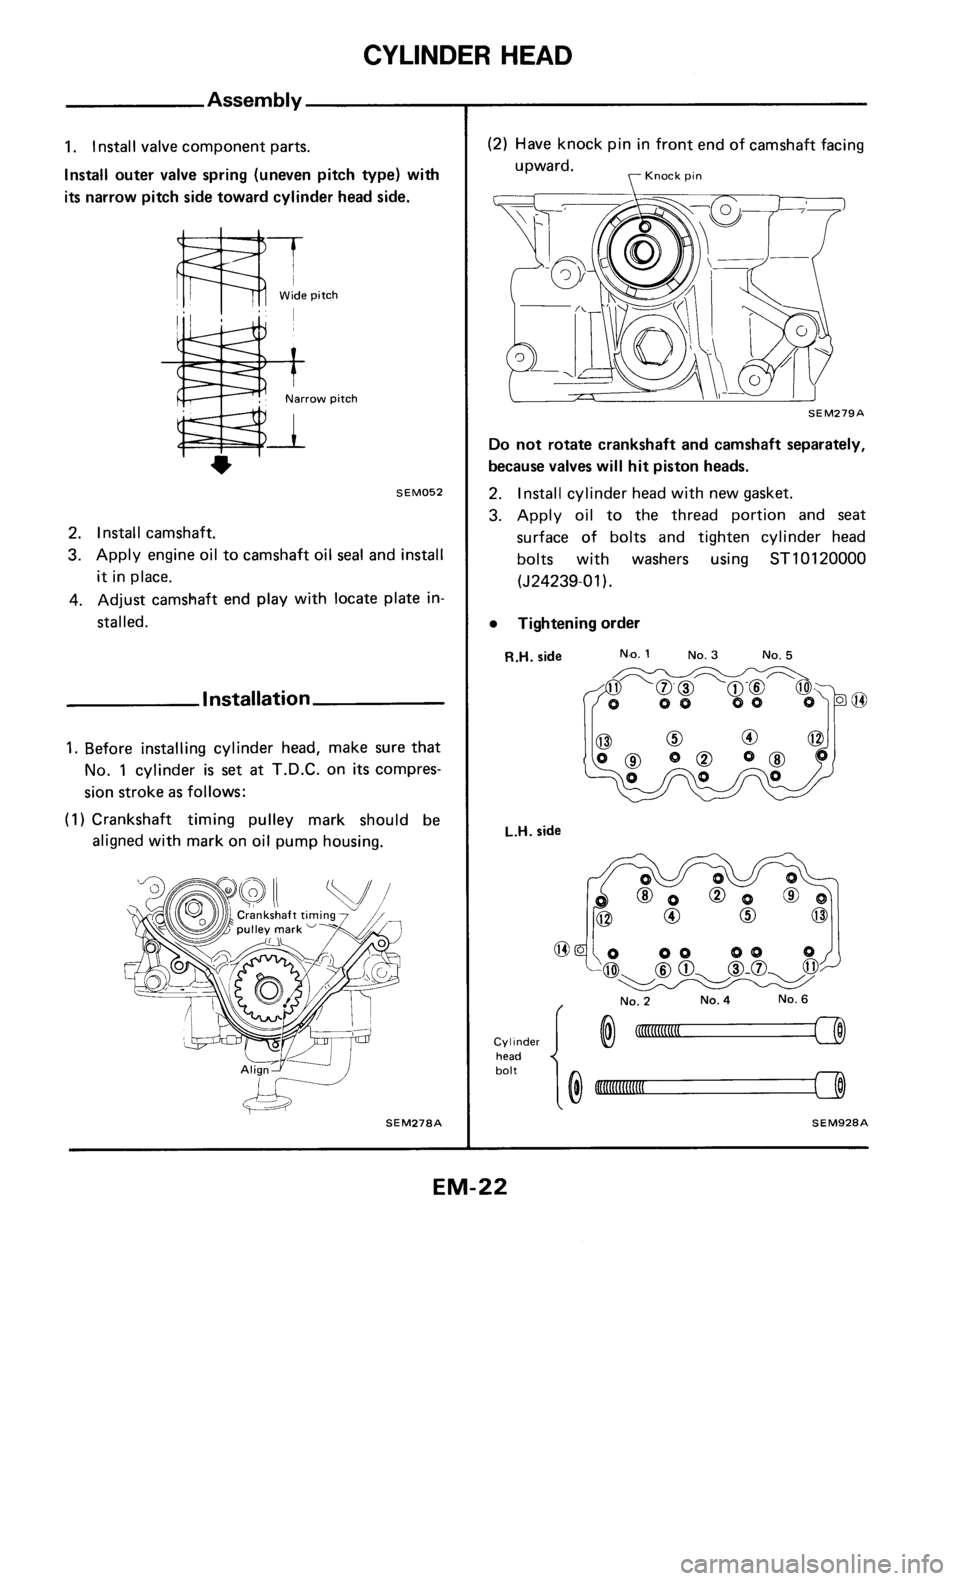 NISSAN 300ZX 1986 Z31 Engine Mechanical Owners Manual 